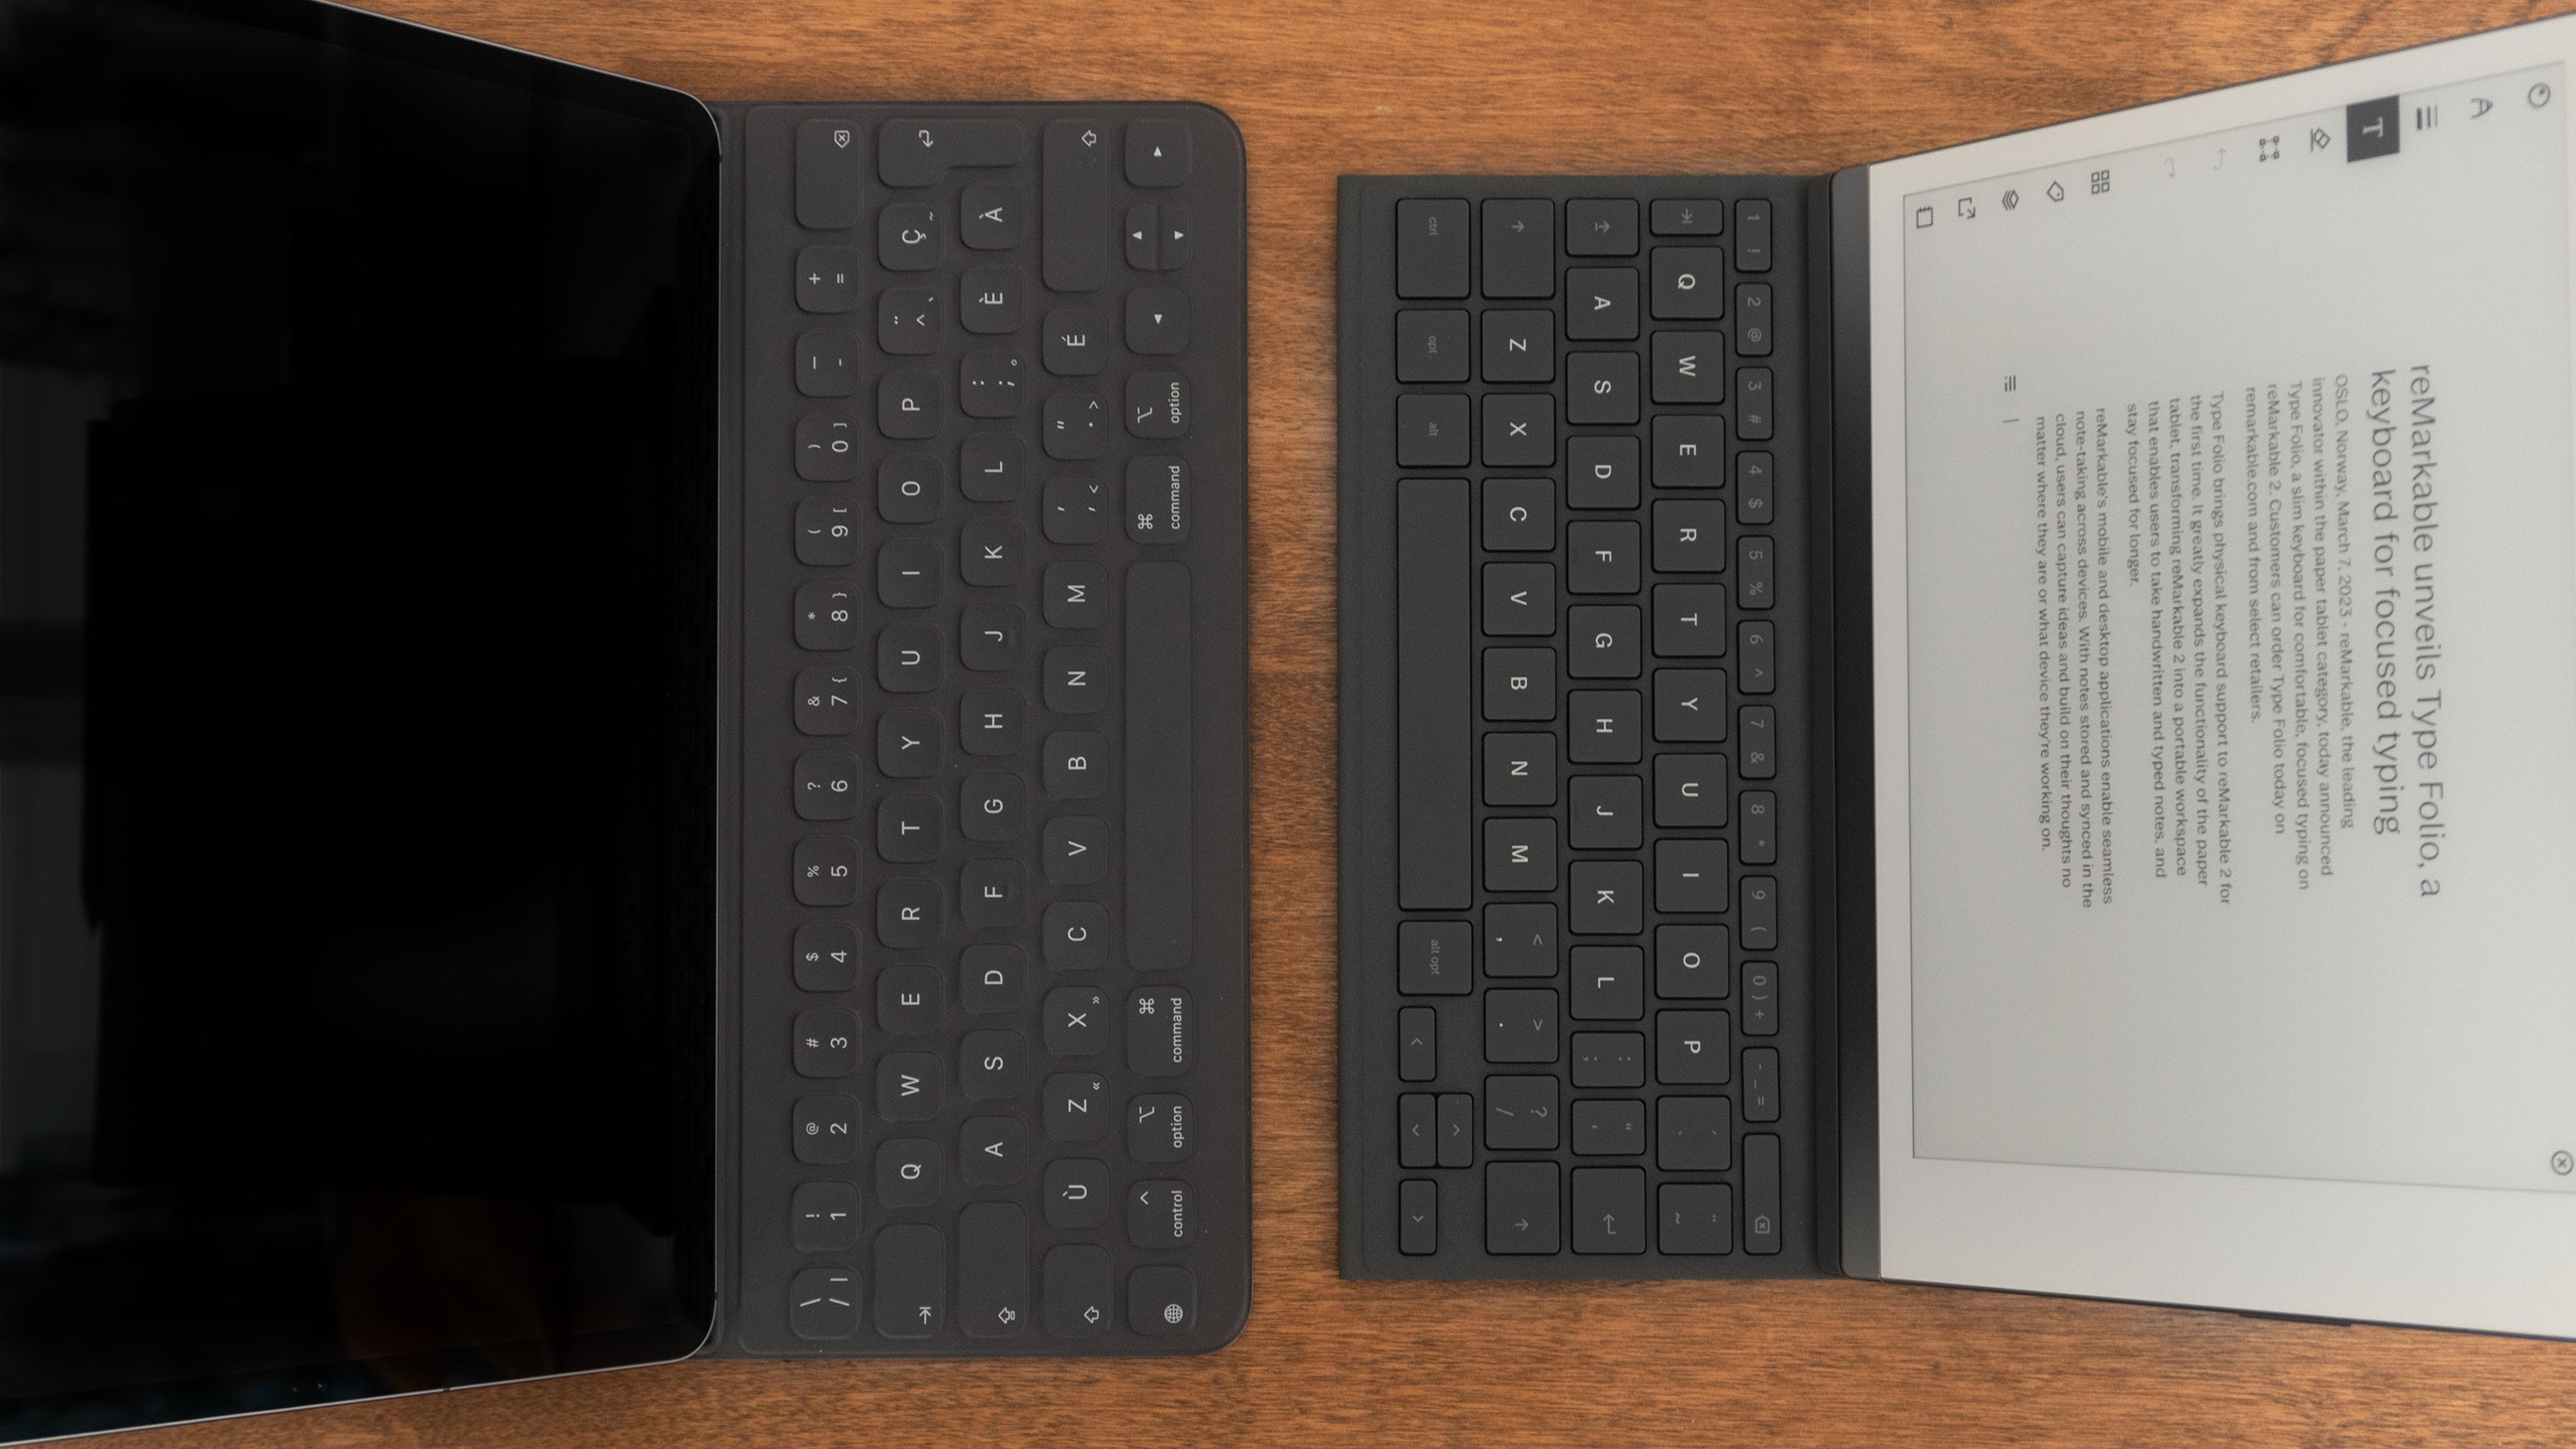 The Type Folio case (right) uses a compact, squished keyboard layout that my large hands found a little cramped, but it was still very useable, and a big improvement over the reMarkable 2's on-screen keyboard. (Photo: Andrew Liszewski | Gizmodo)